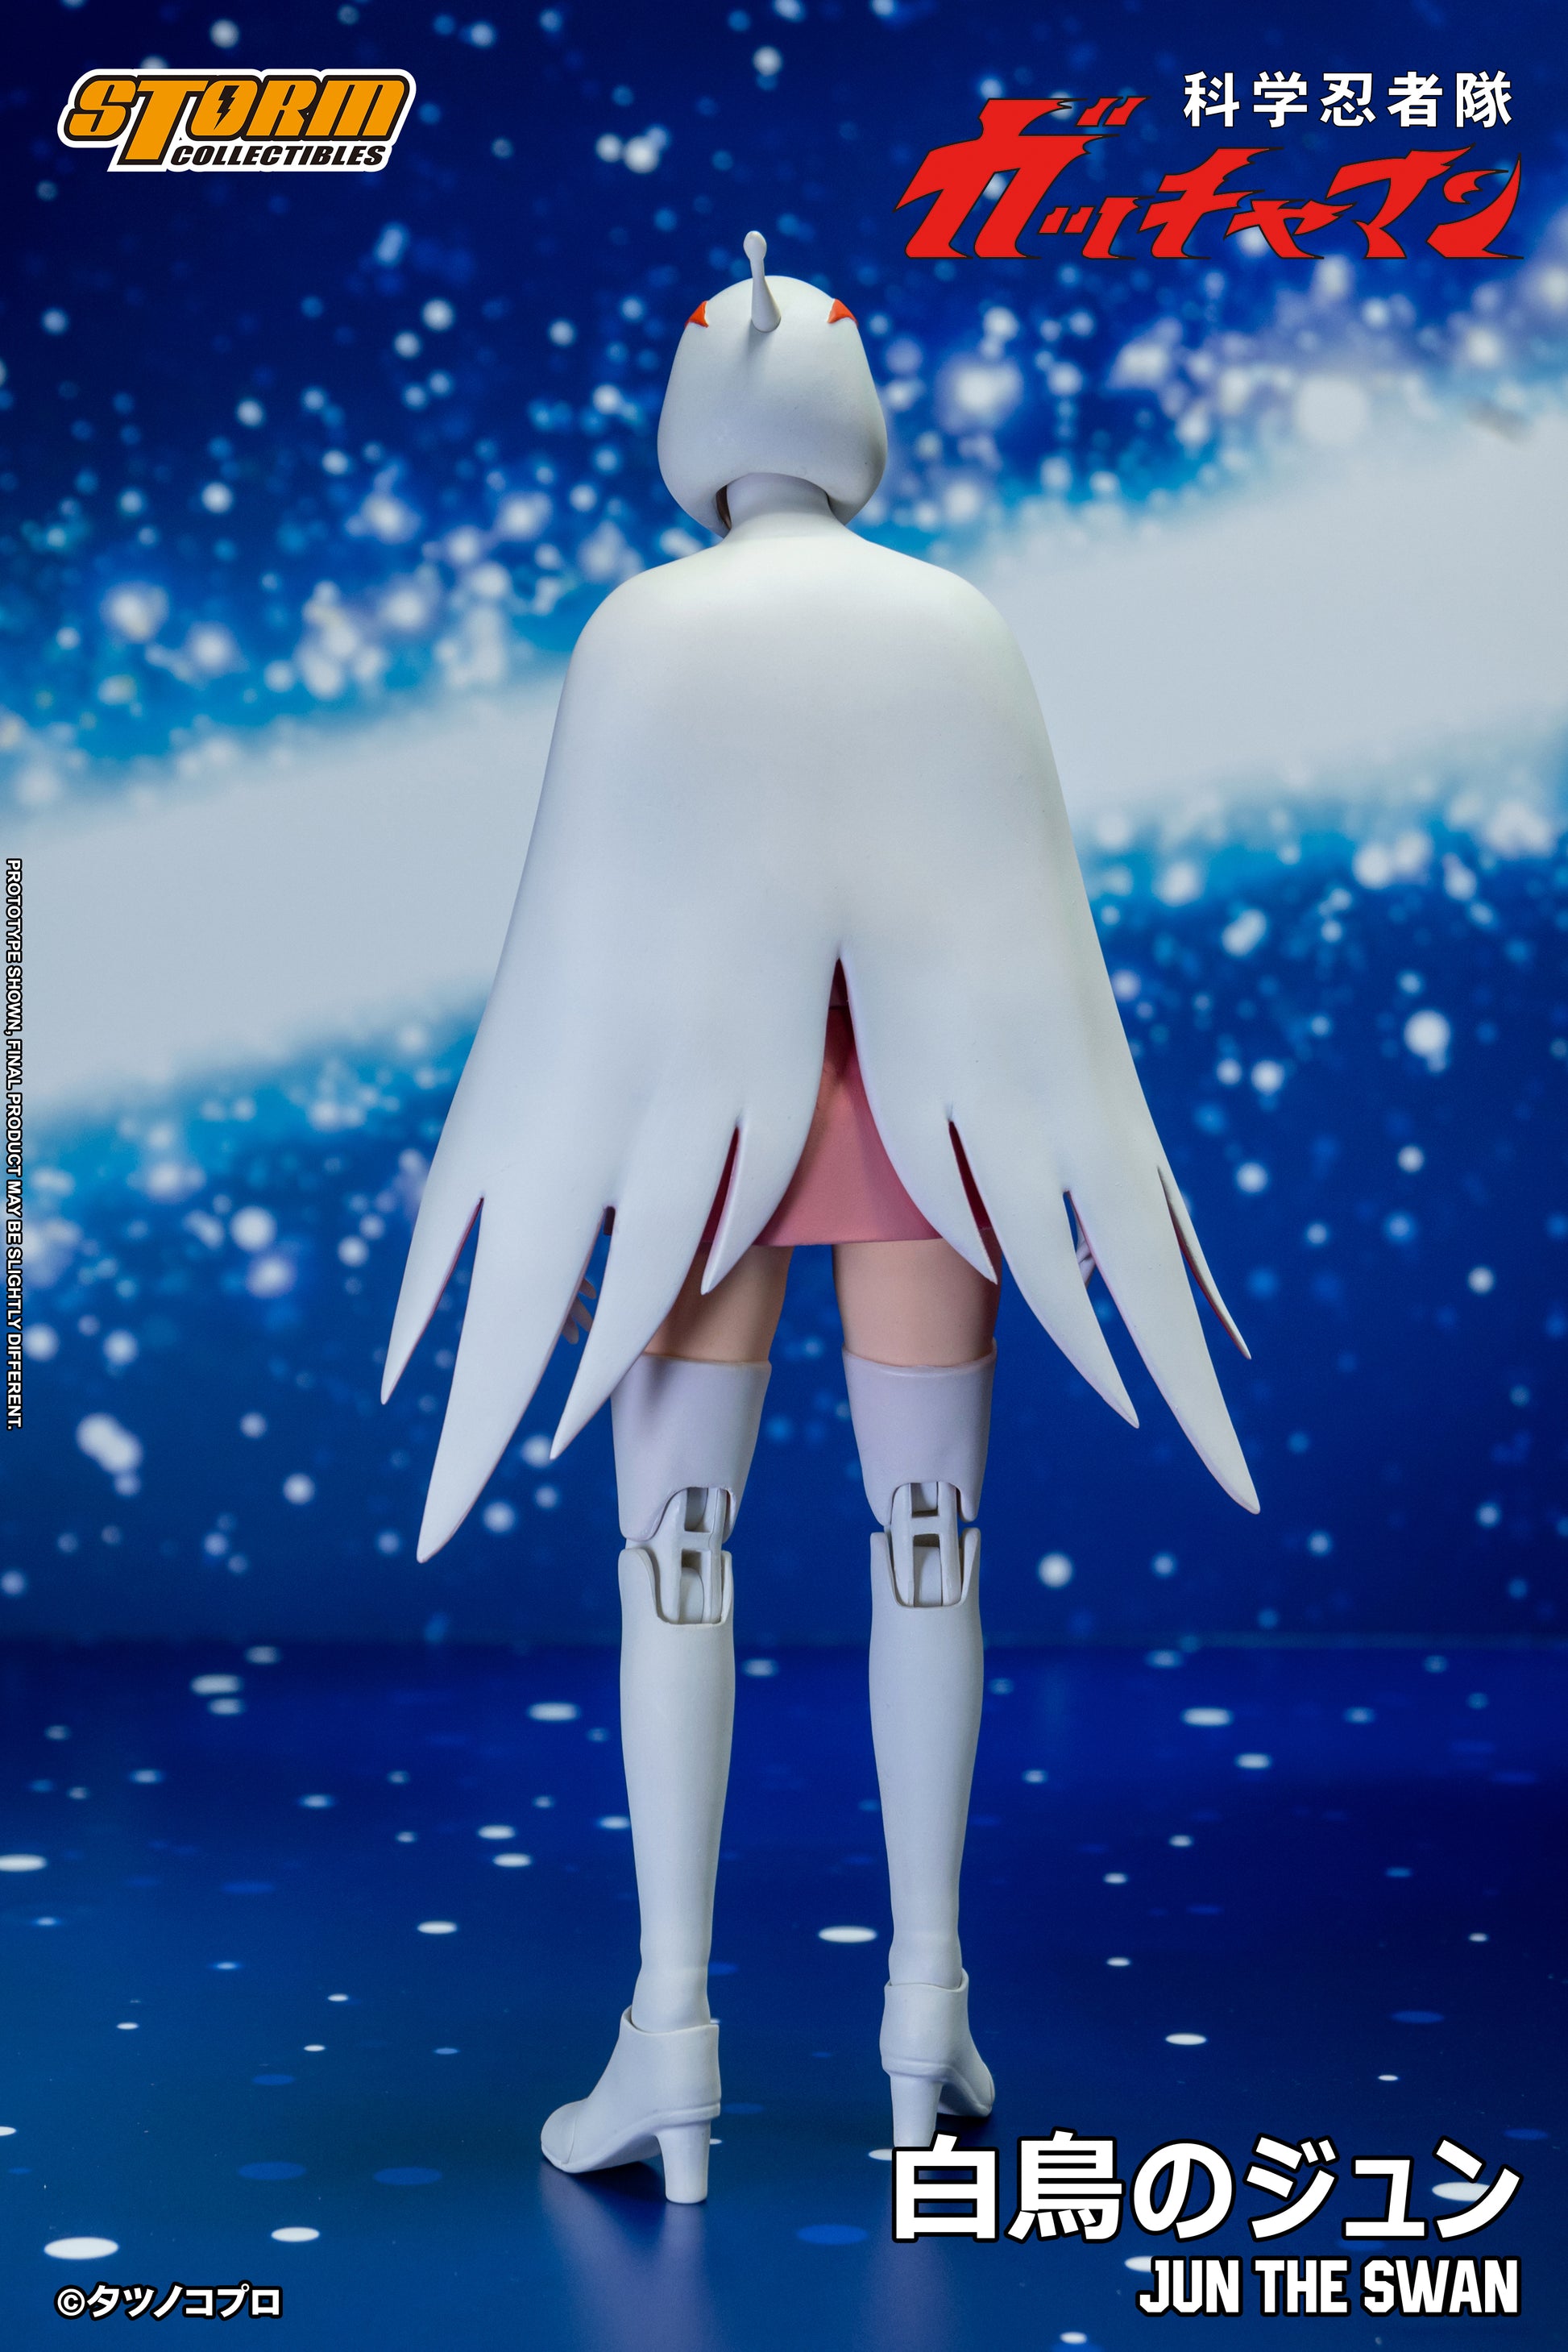 Gatchaman Jun THE SWAN by Storm Collectibles back view